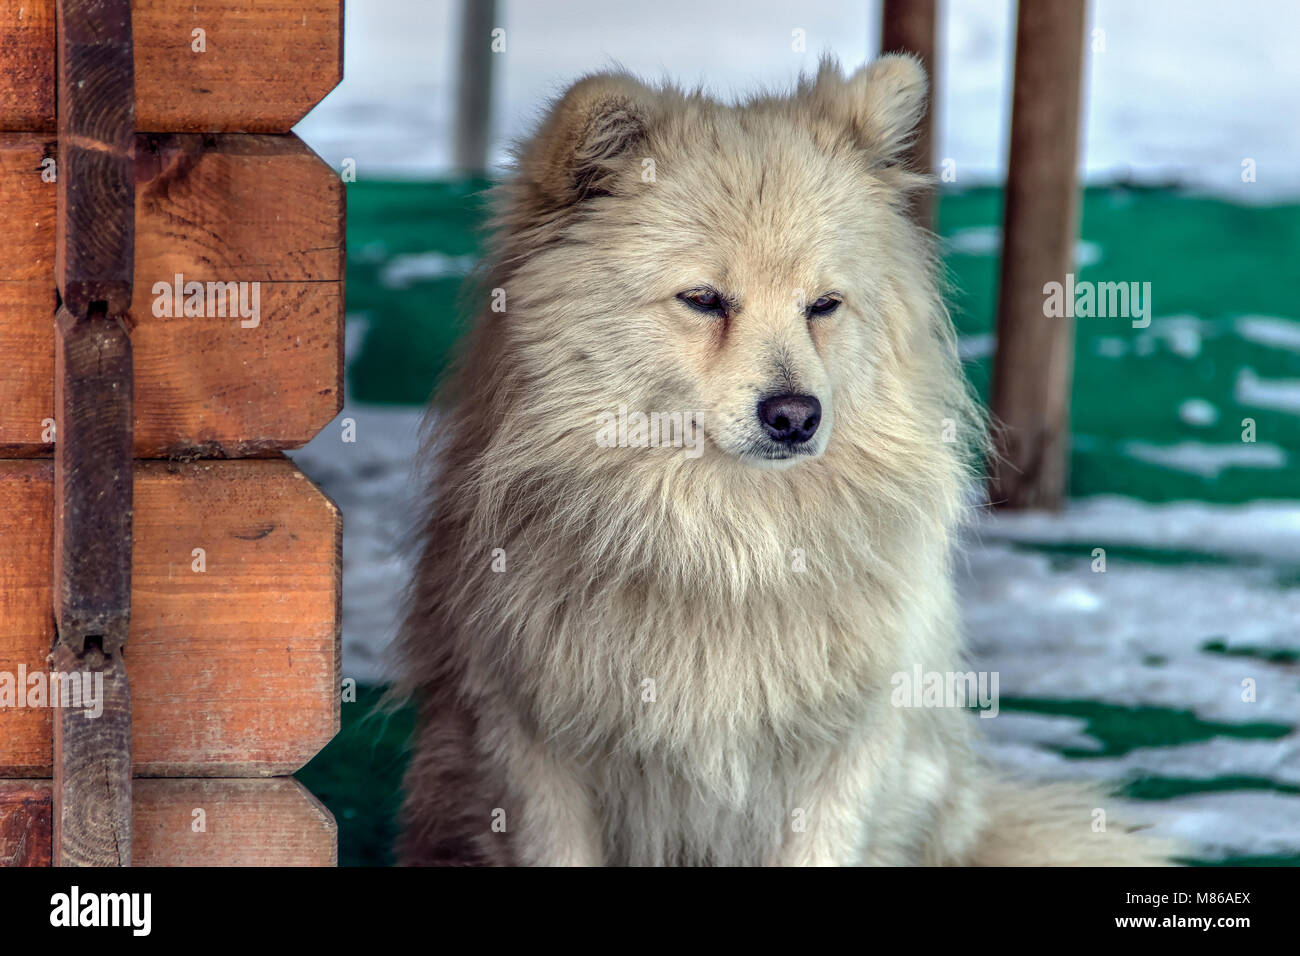 Serbia - Portrait of a handsome little mutt dog Stock Photo